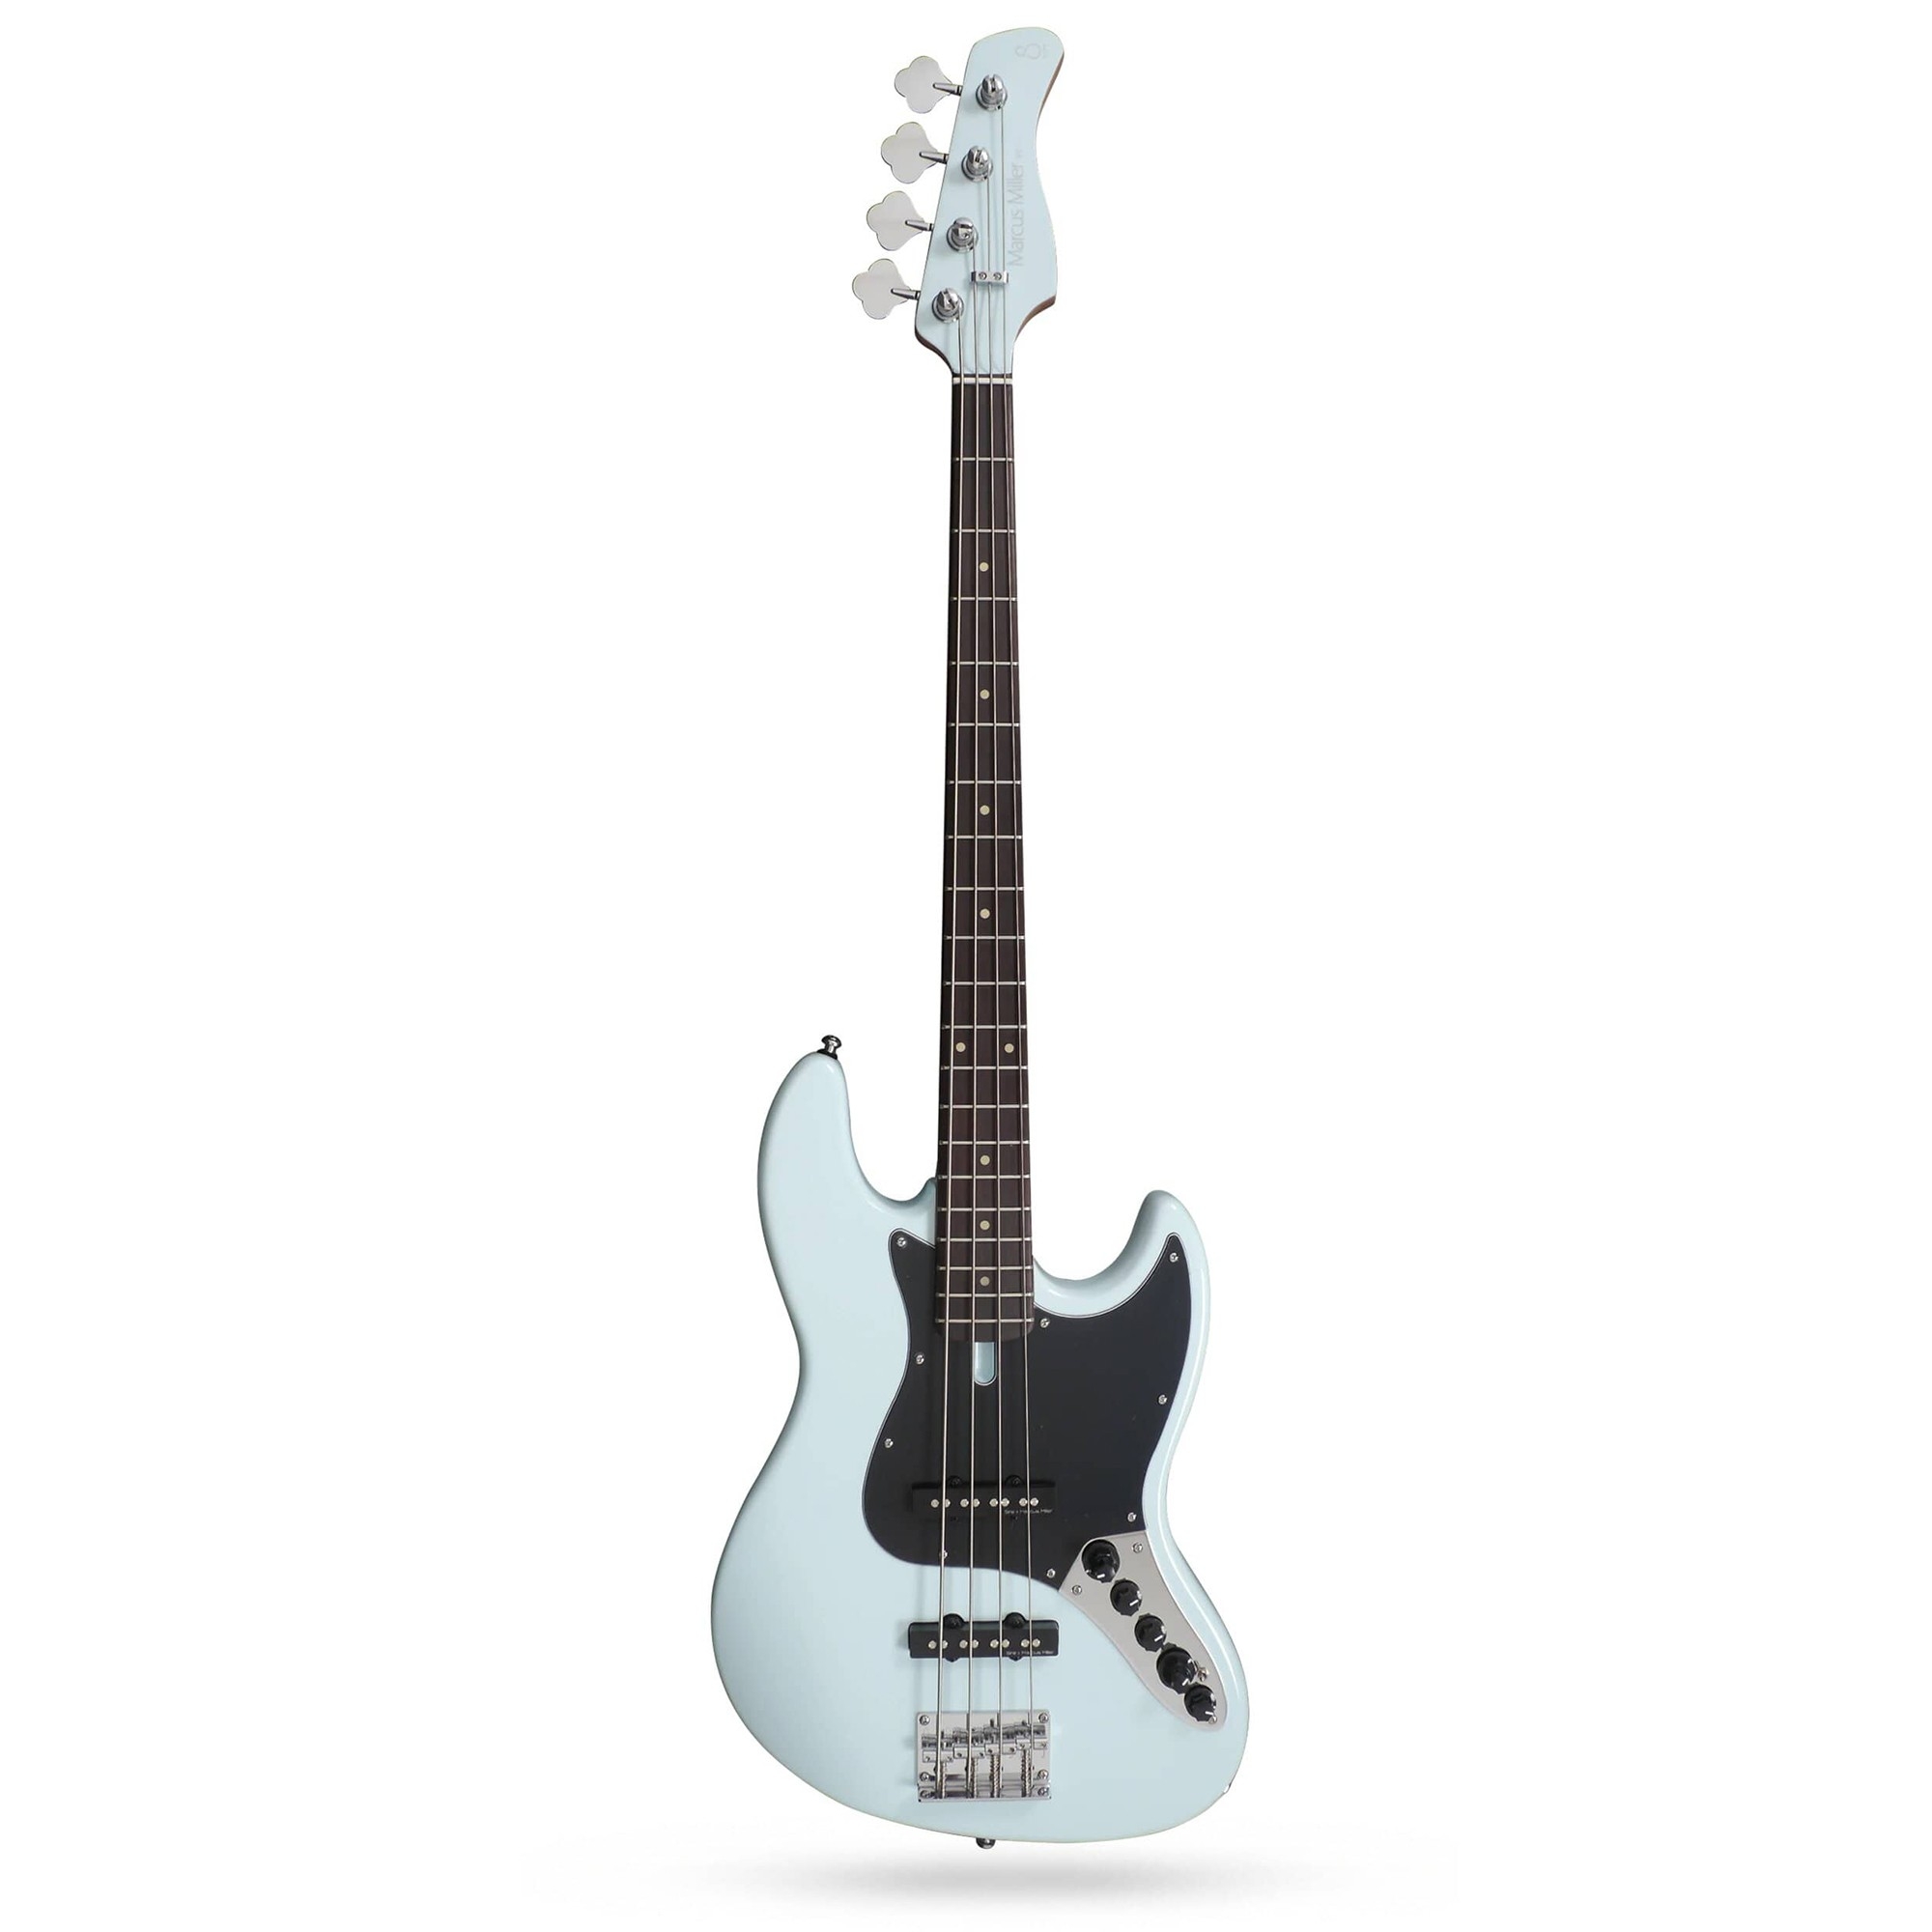 Sire BASSE ELECTRIQUE MARCUS MILLER SIRE V3 SONIC BLUE